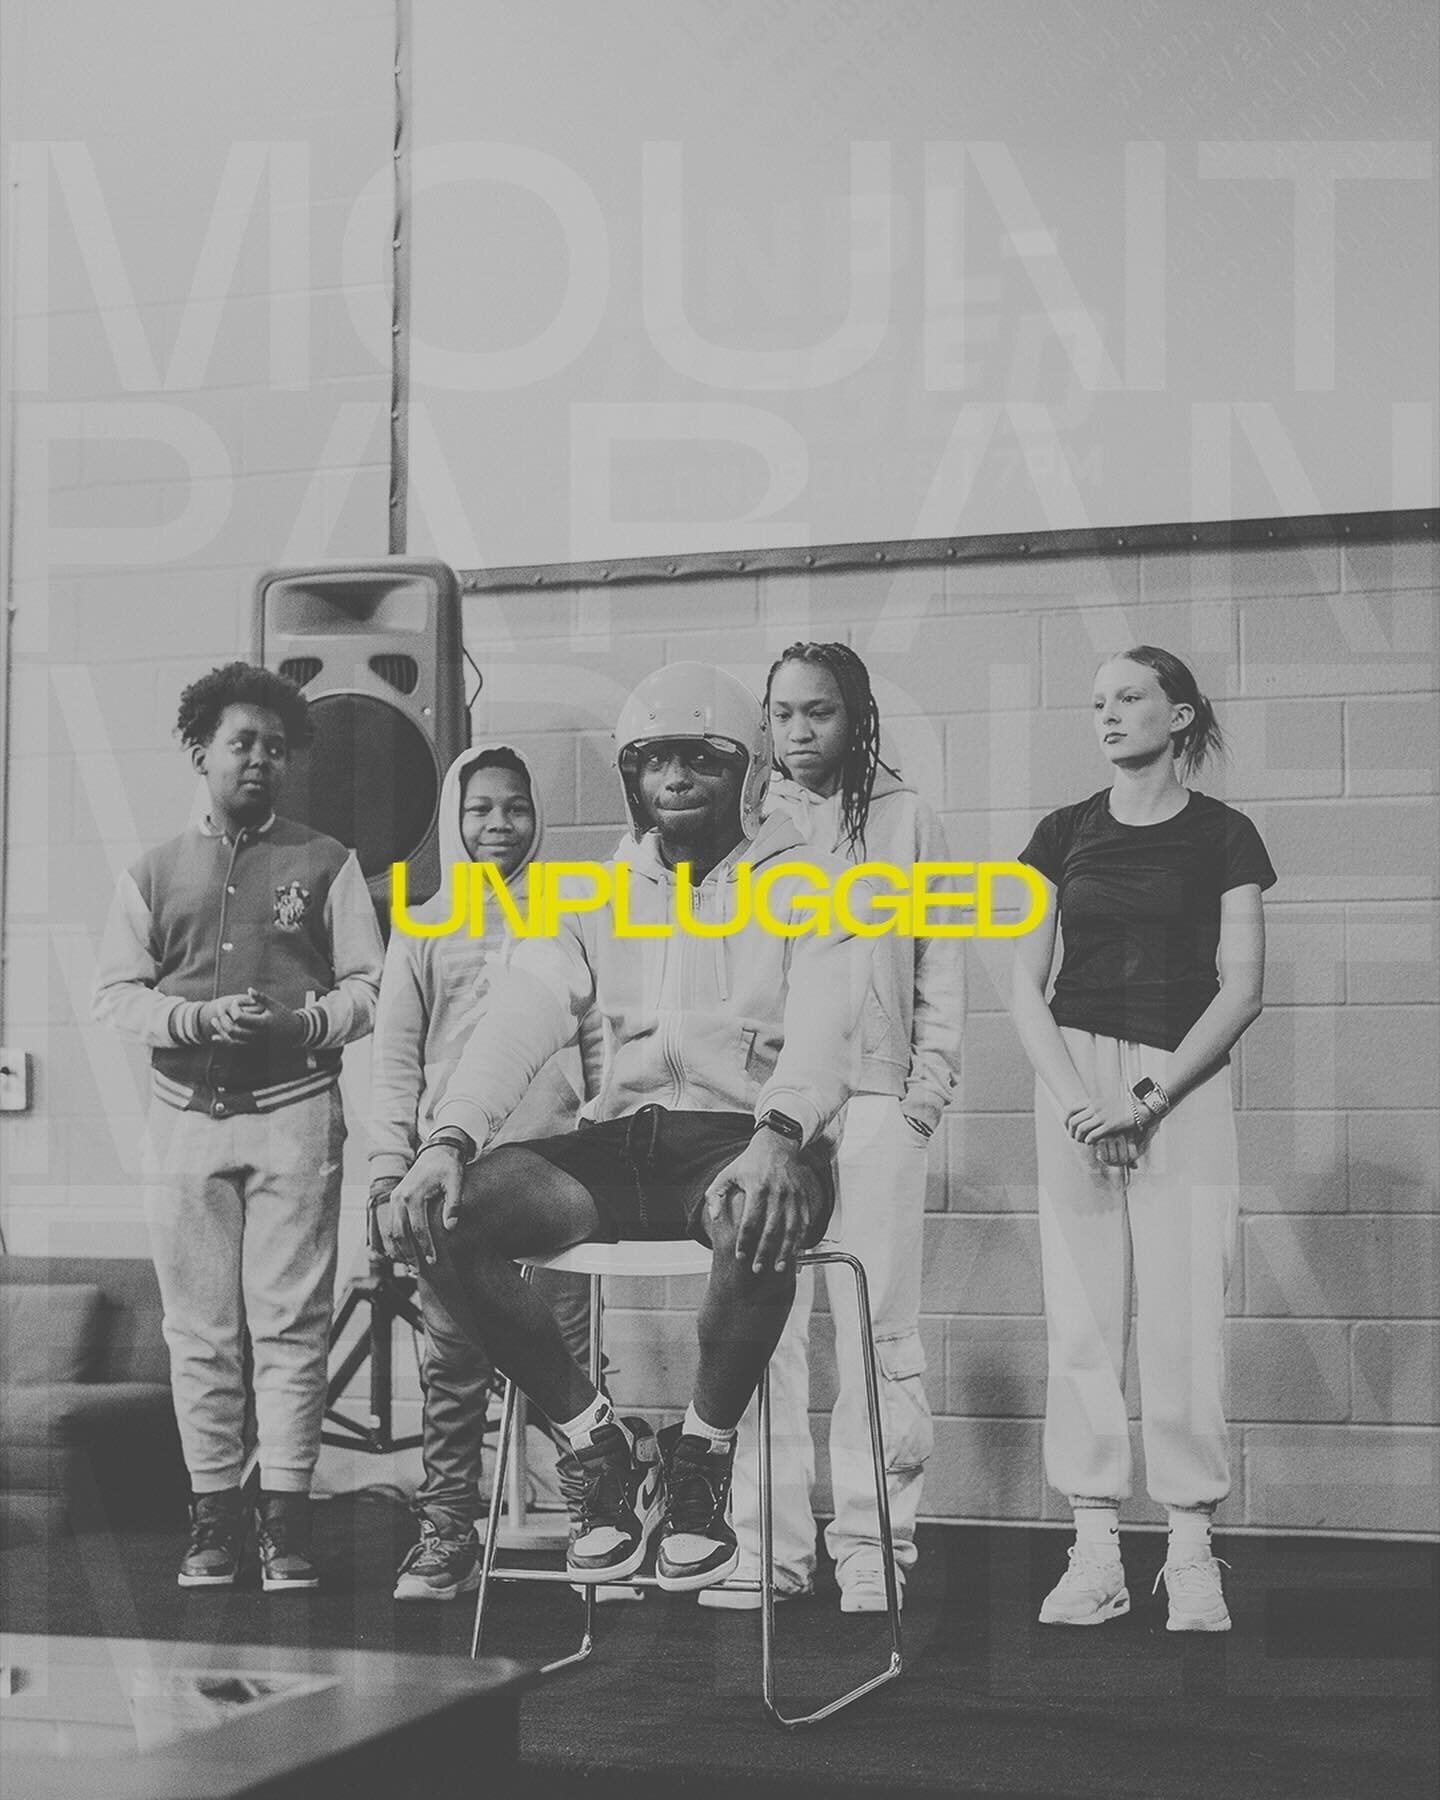 UNPLUG tonight at UNPLUGGED at seven pm in the youth center.
See you there!

#MountParanChurch #MountParanYouth #Atlanta #AtlantaChristians #AtlantaYouth #MiddleSchool #Faith #YouthMinistry #YouthGroup #StudentMinistry